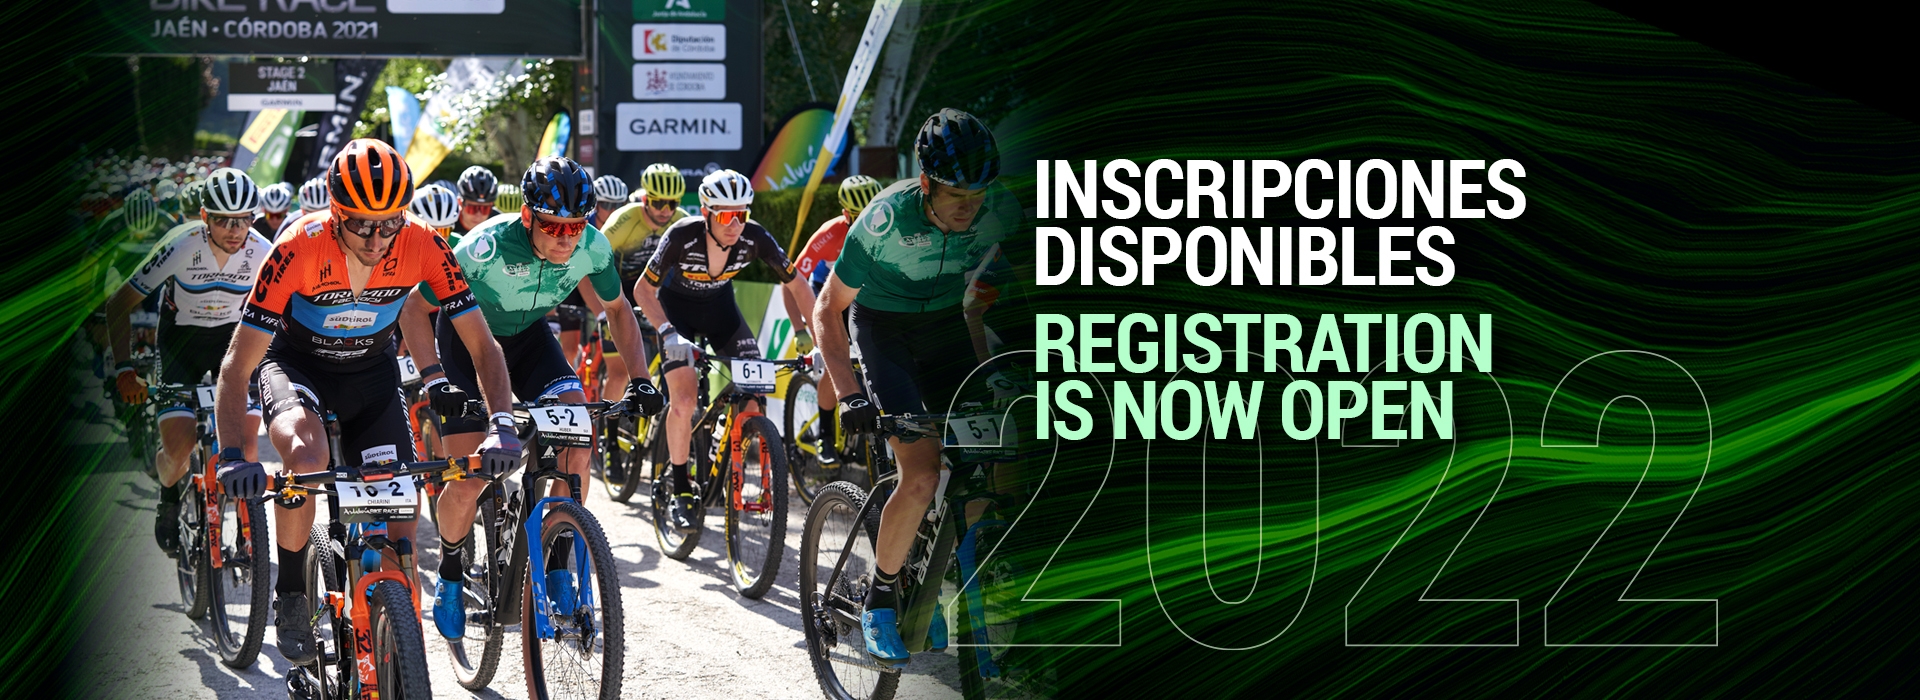 Registrations open! Be quick and take advantage of the launch offer!